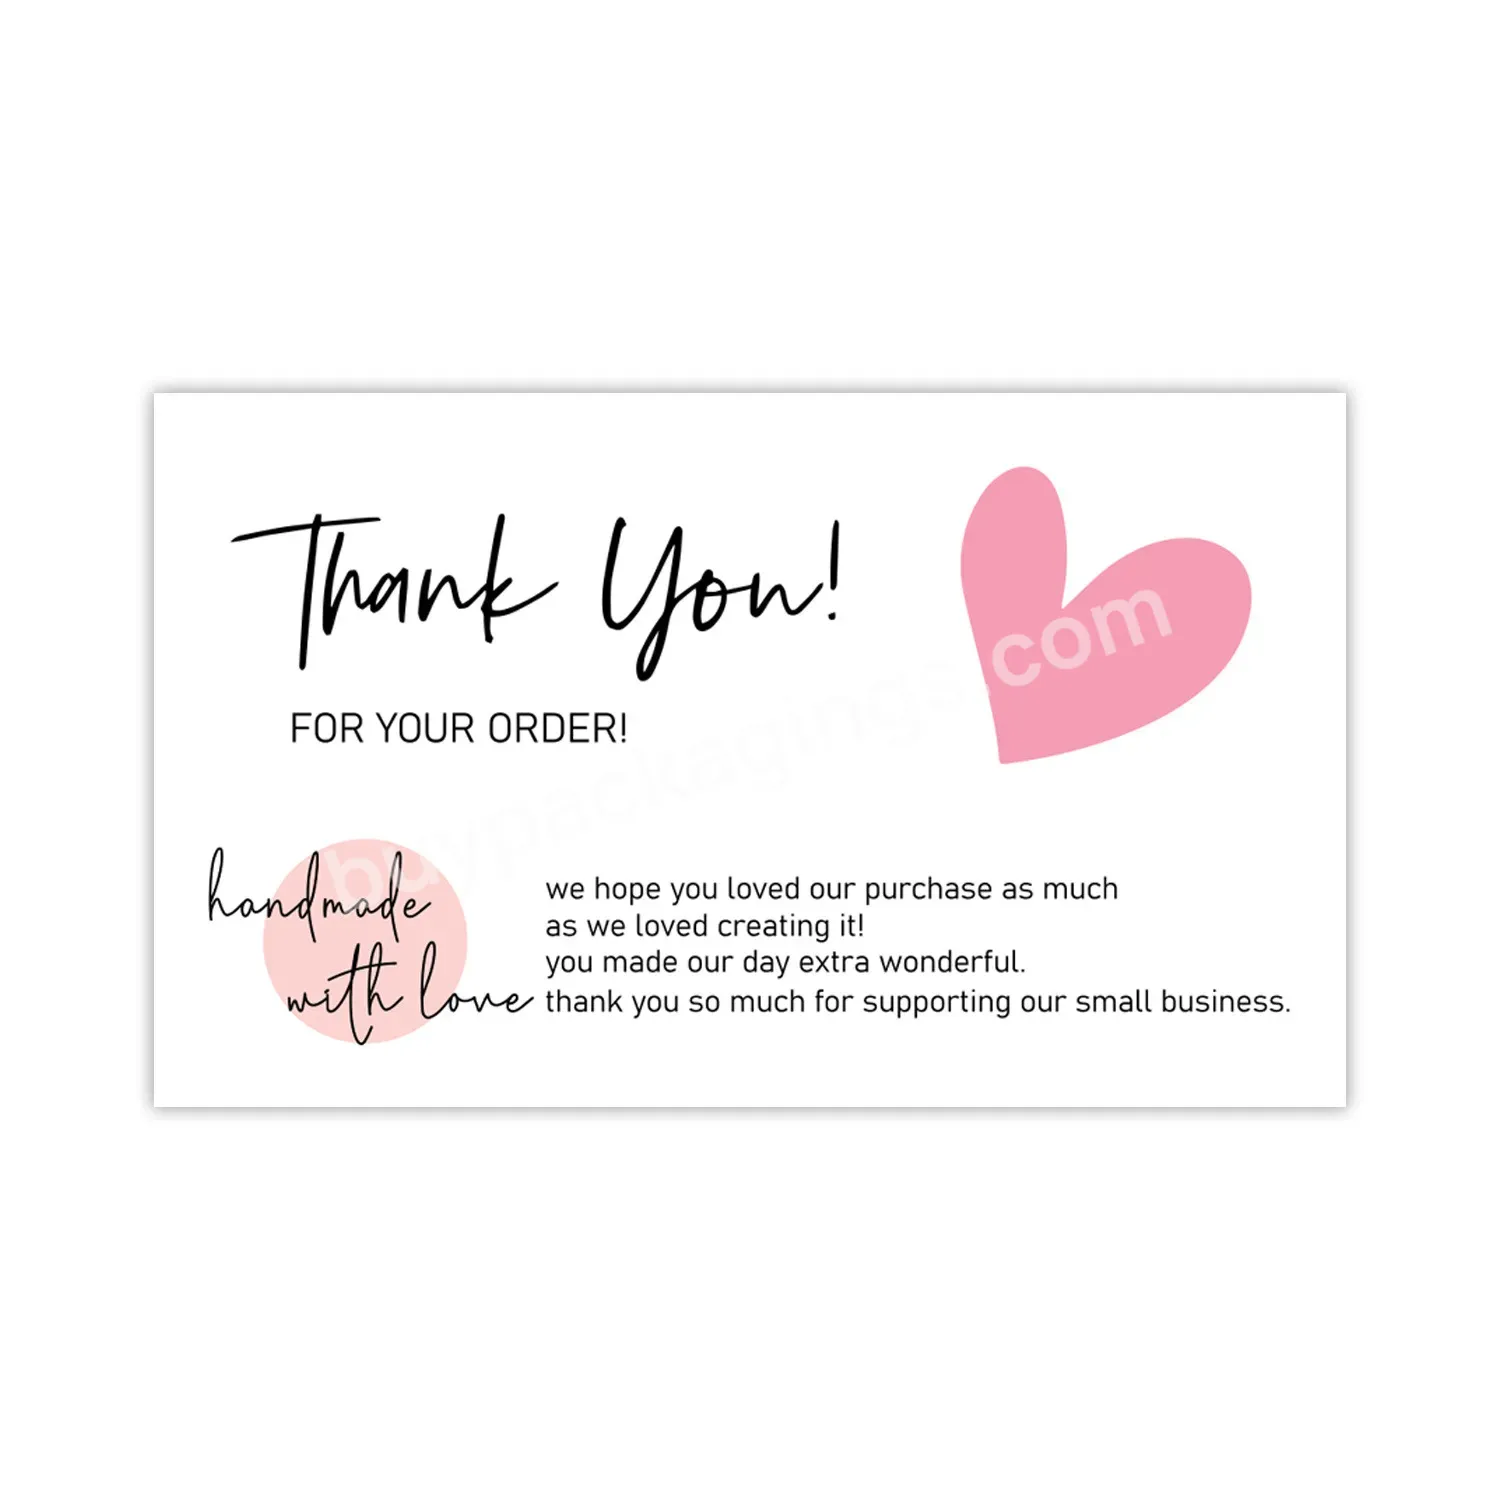 Custom Logo High Quality Birthday Cards Brochure Thank You Cards For Small Business